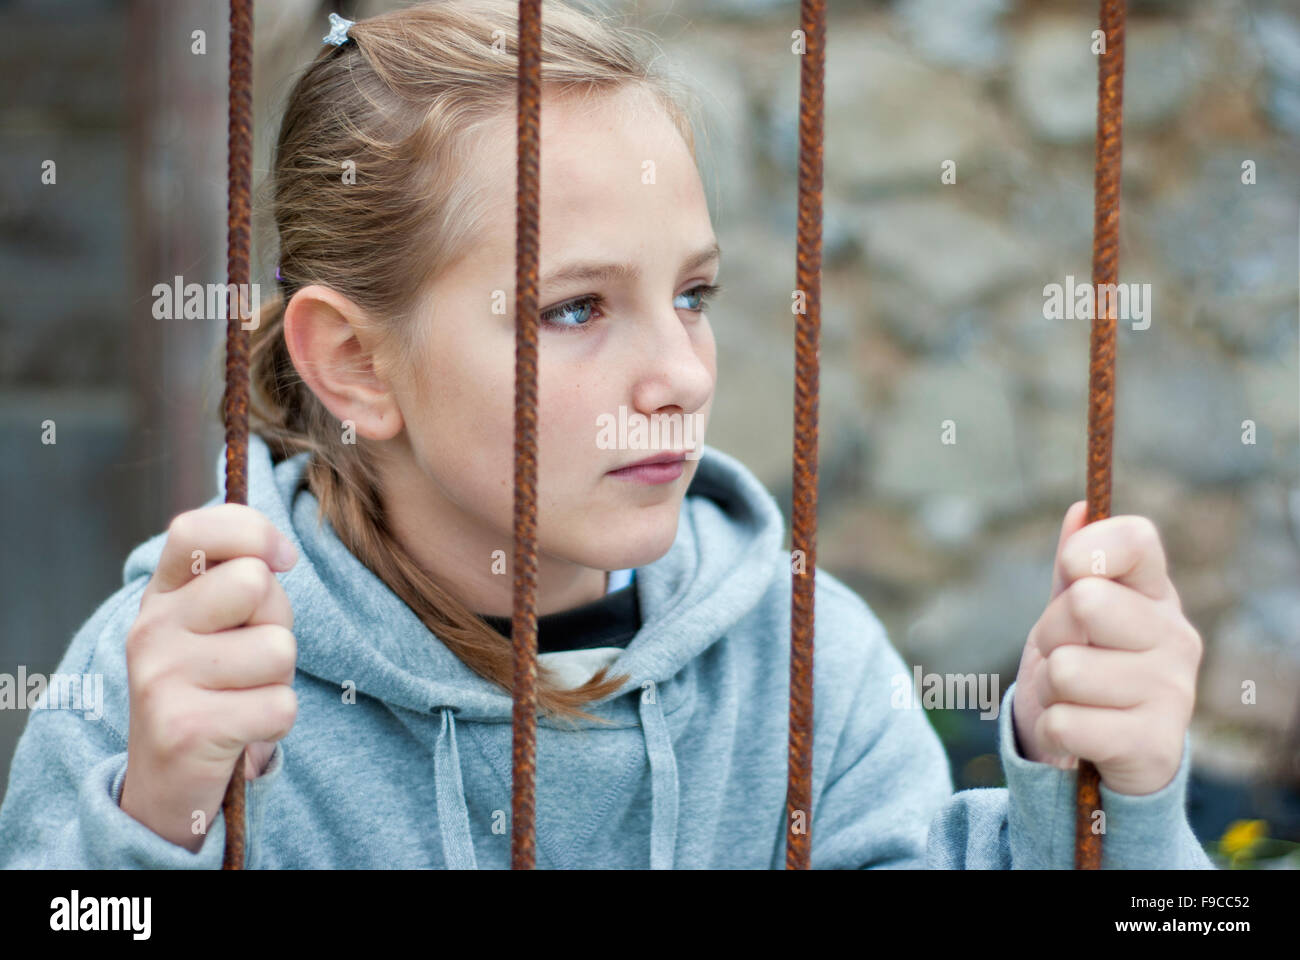 Sad lonely child is behind grid Stock Photo